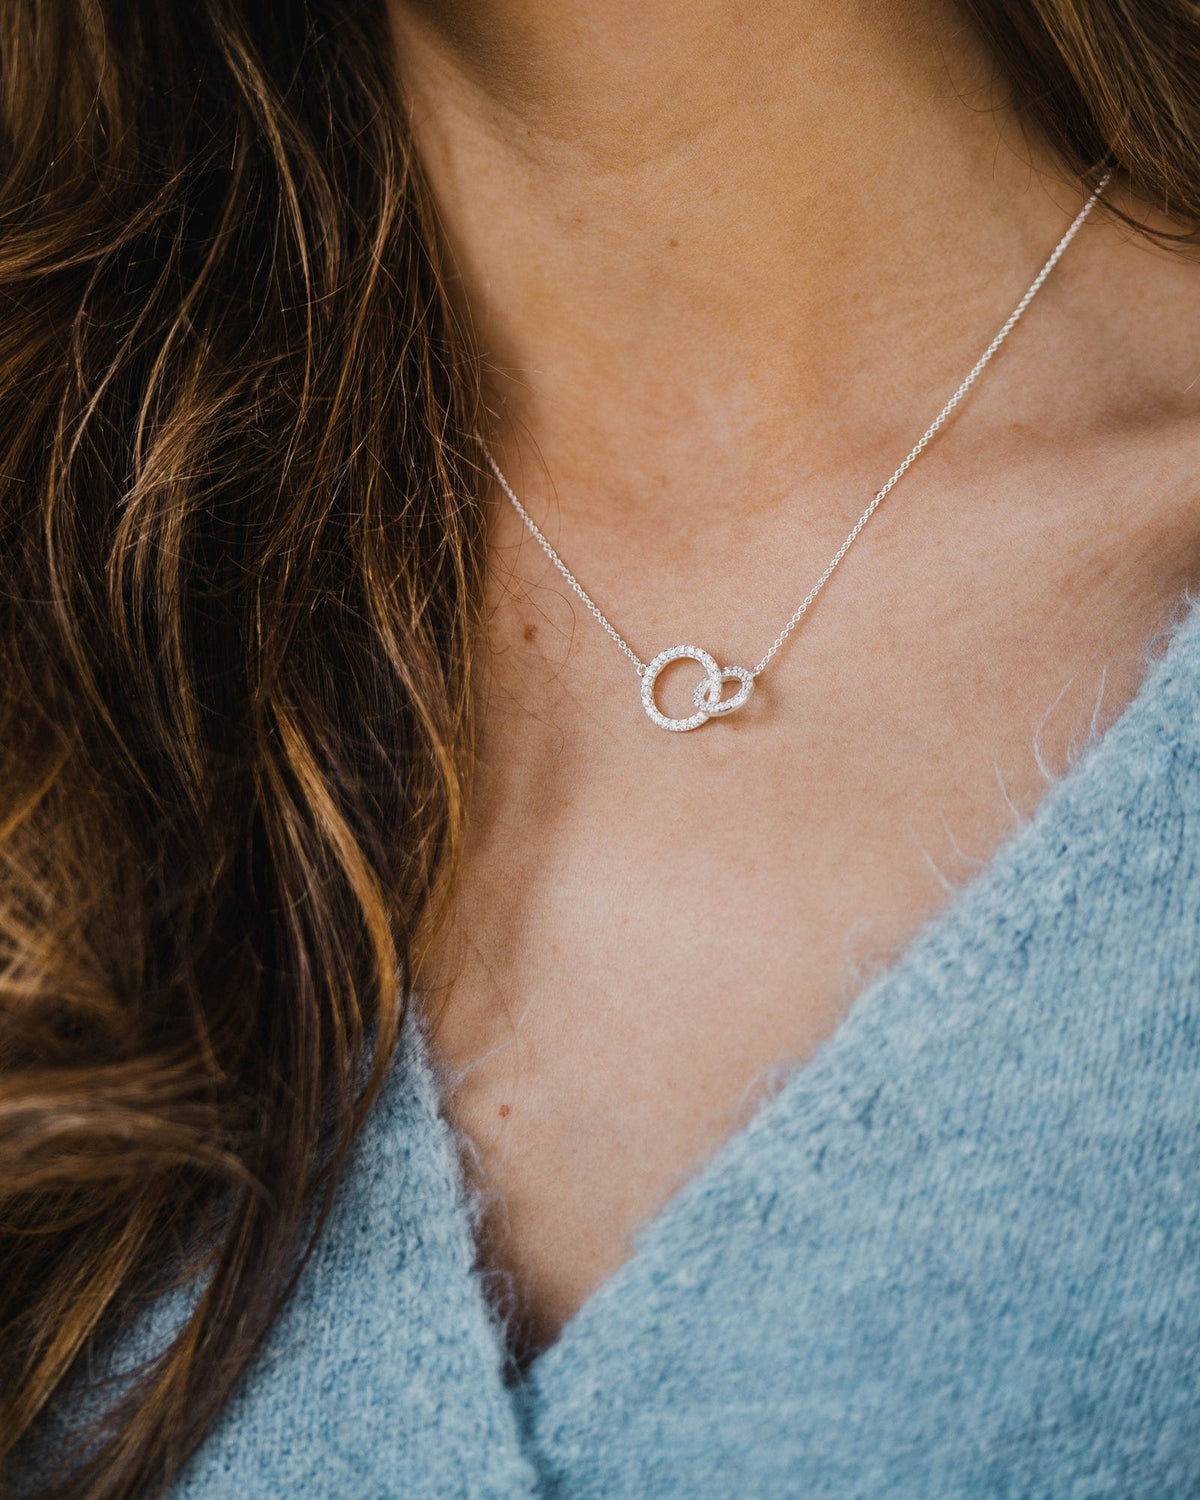 Interlinked Rings Pendant Necklace - New Arrivals